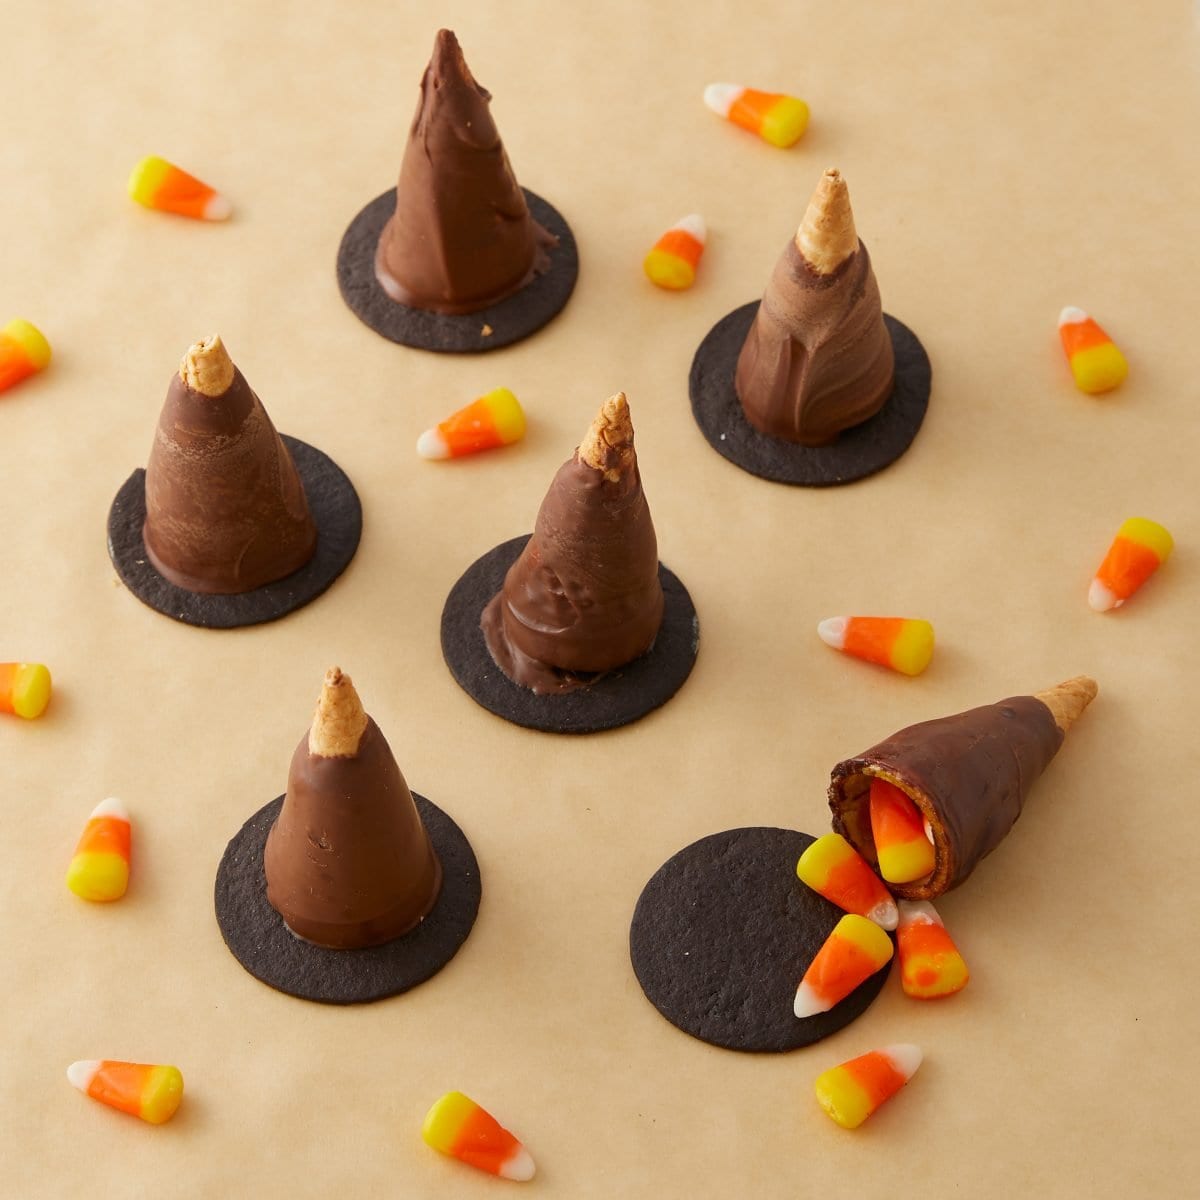 Darcy Miller, Halloween, Party, paper, chocolate, ice cream, candy corn, snack